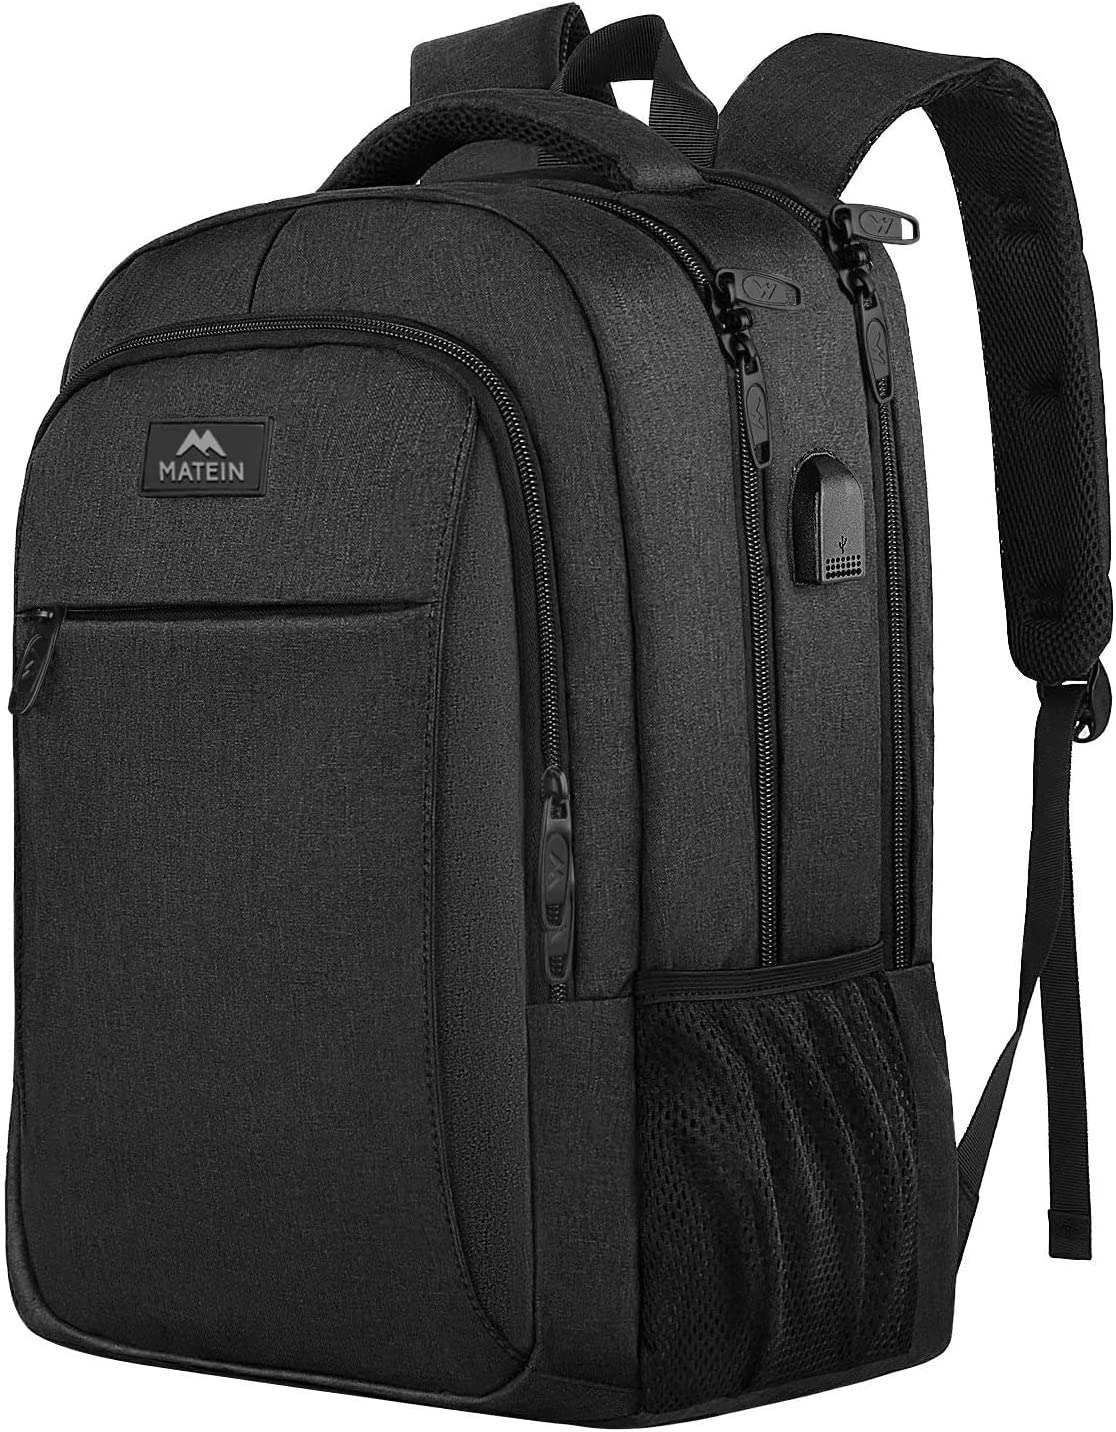 Business Laptop Backpack, 15.6 Inch Travel Laptop Bag Rucksack with USB Charging